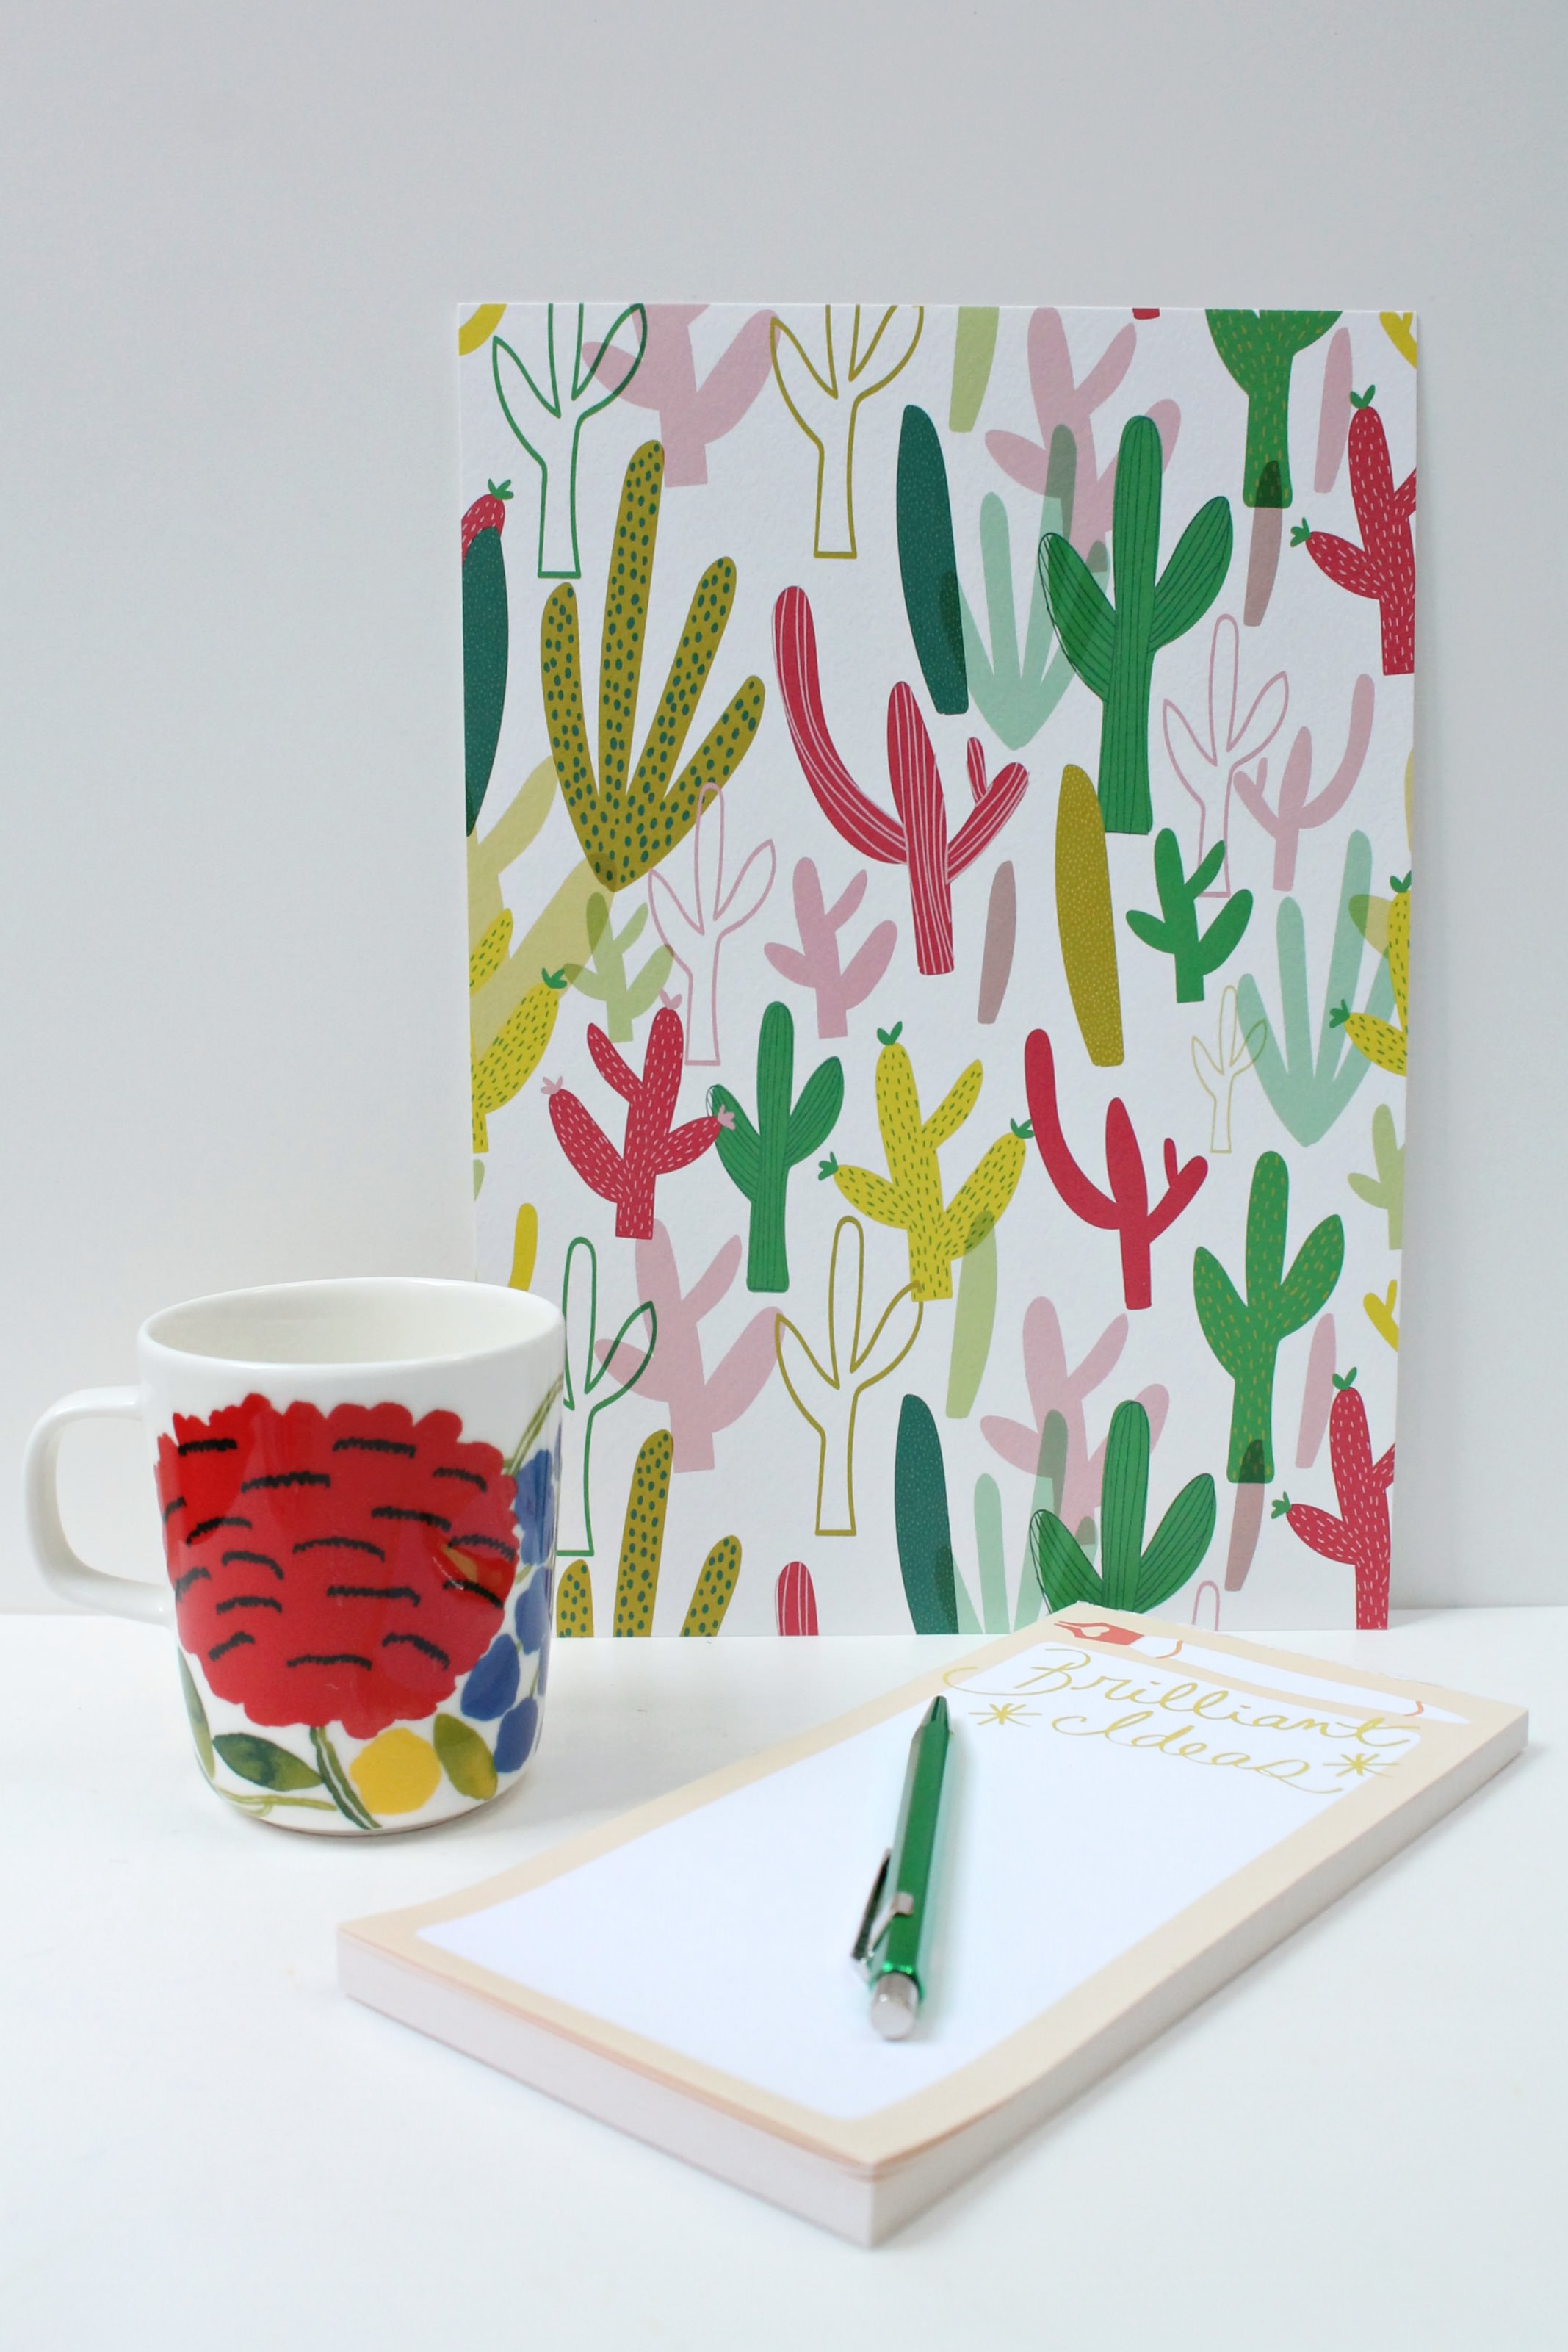 Cactus-print-by-Alice-Potter-styling-and-photo-by-Geraldine-Tan-Little-Big-Bell